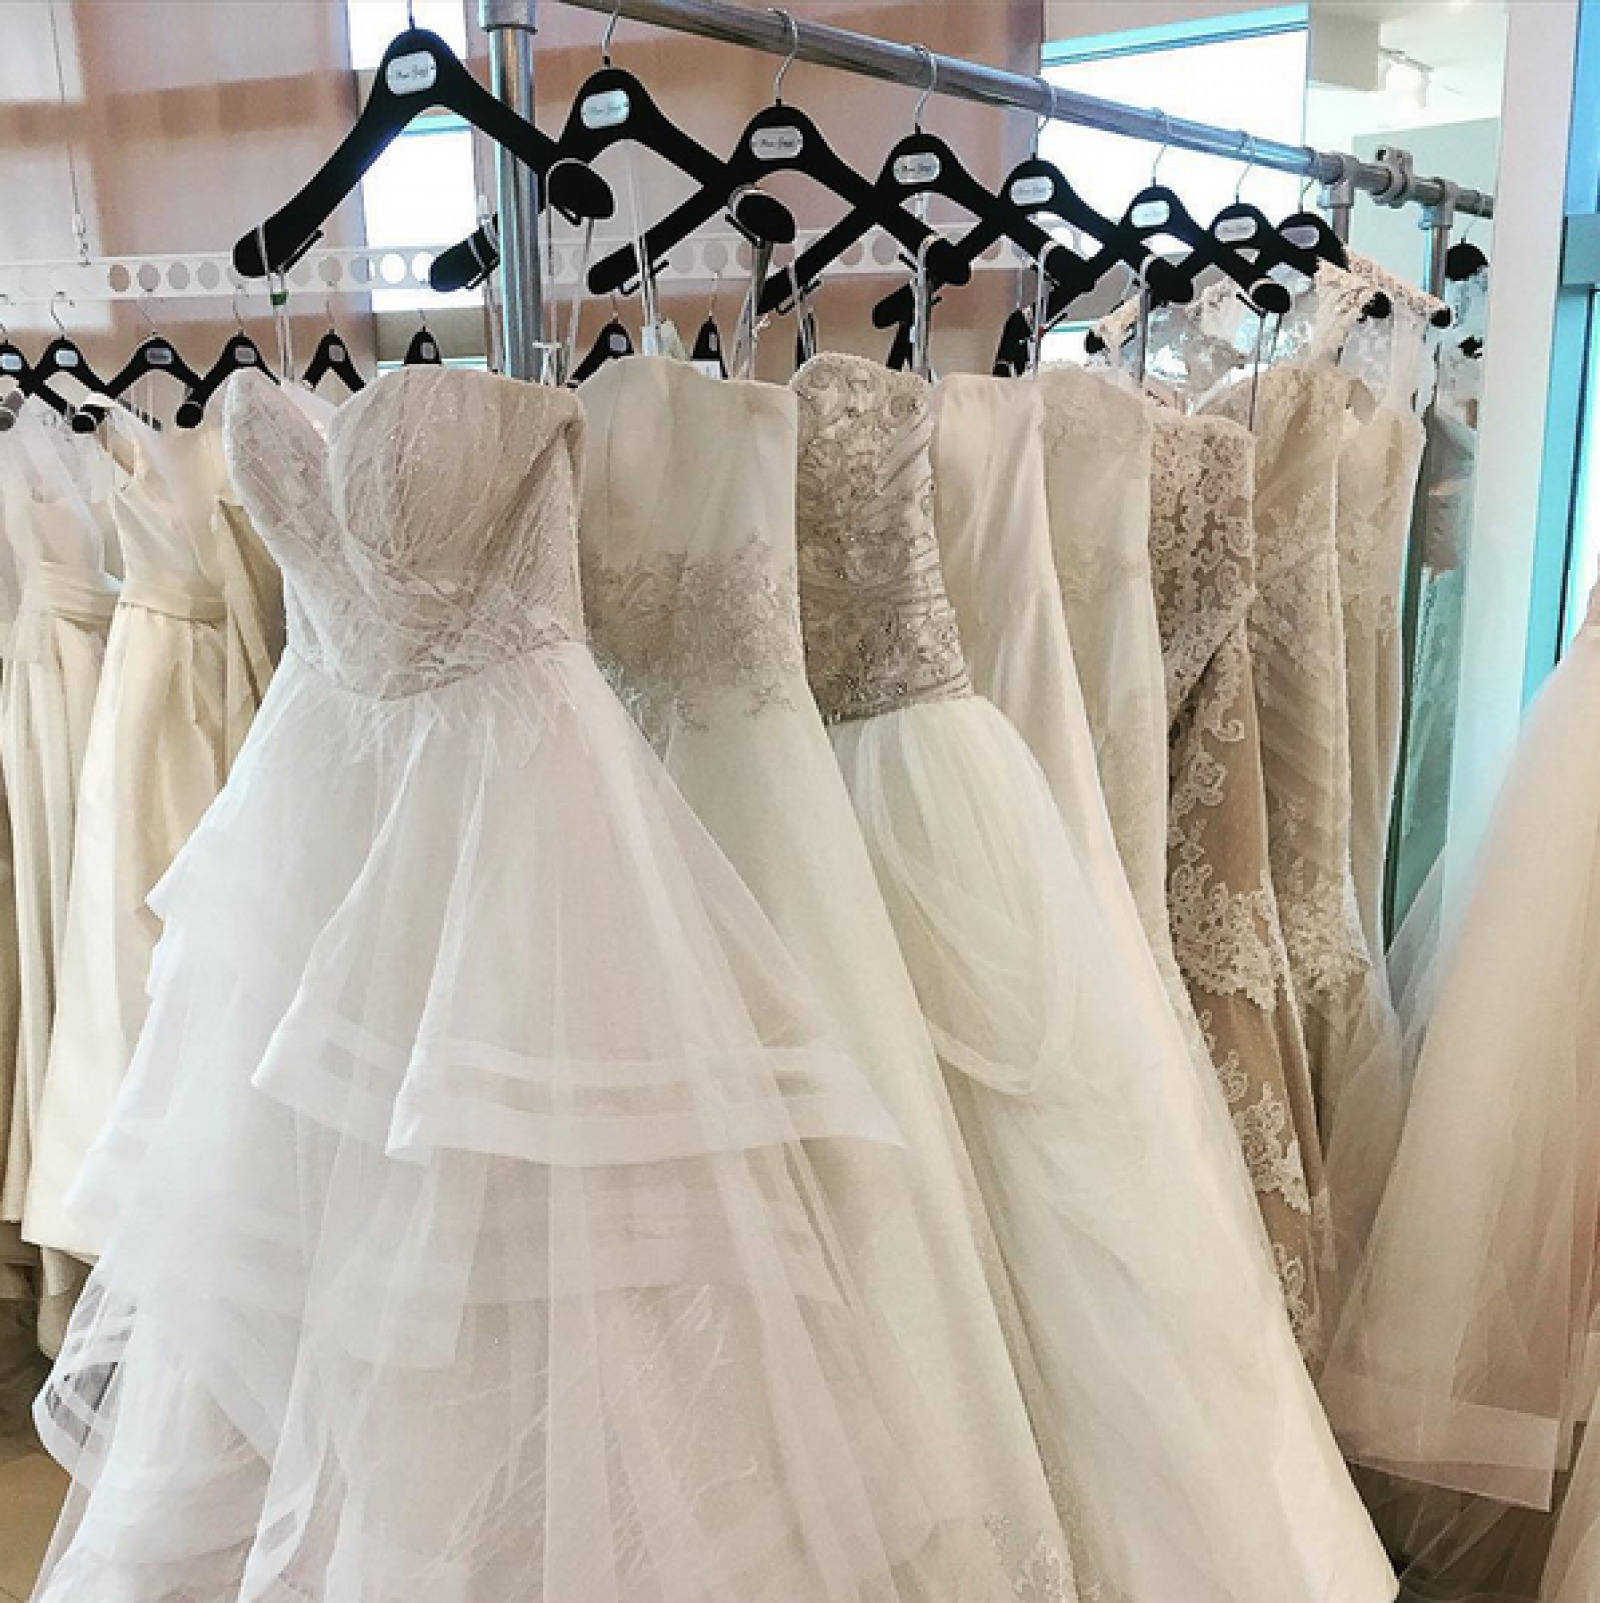 racks of bridal gowns